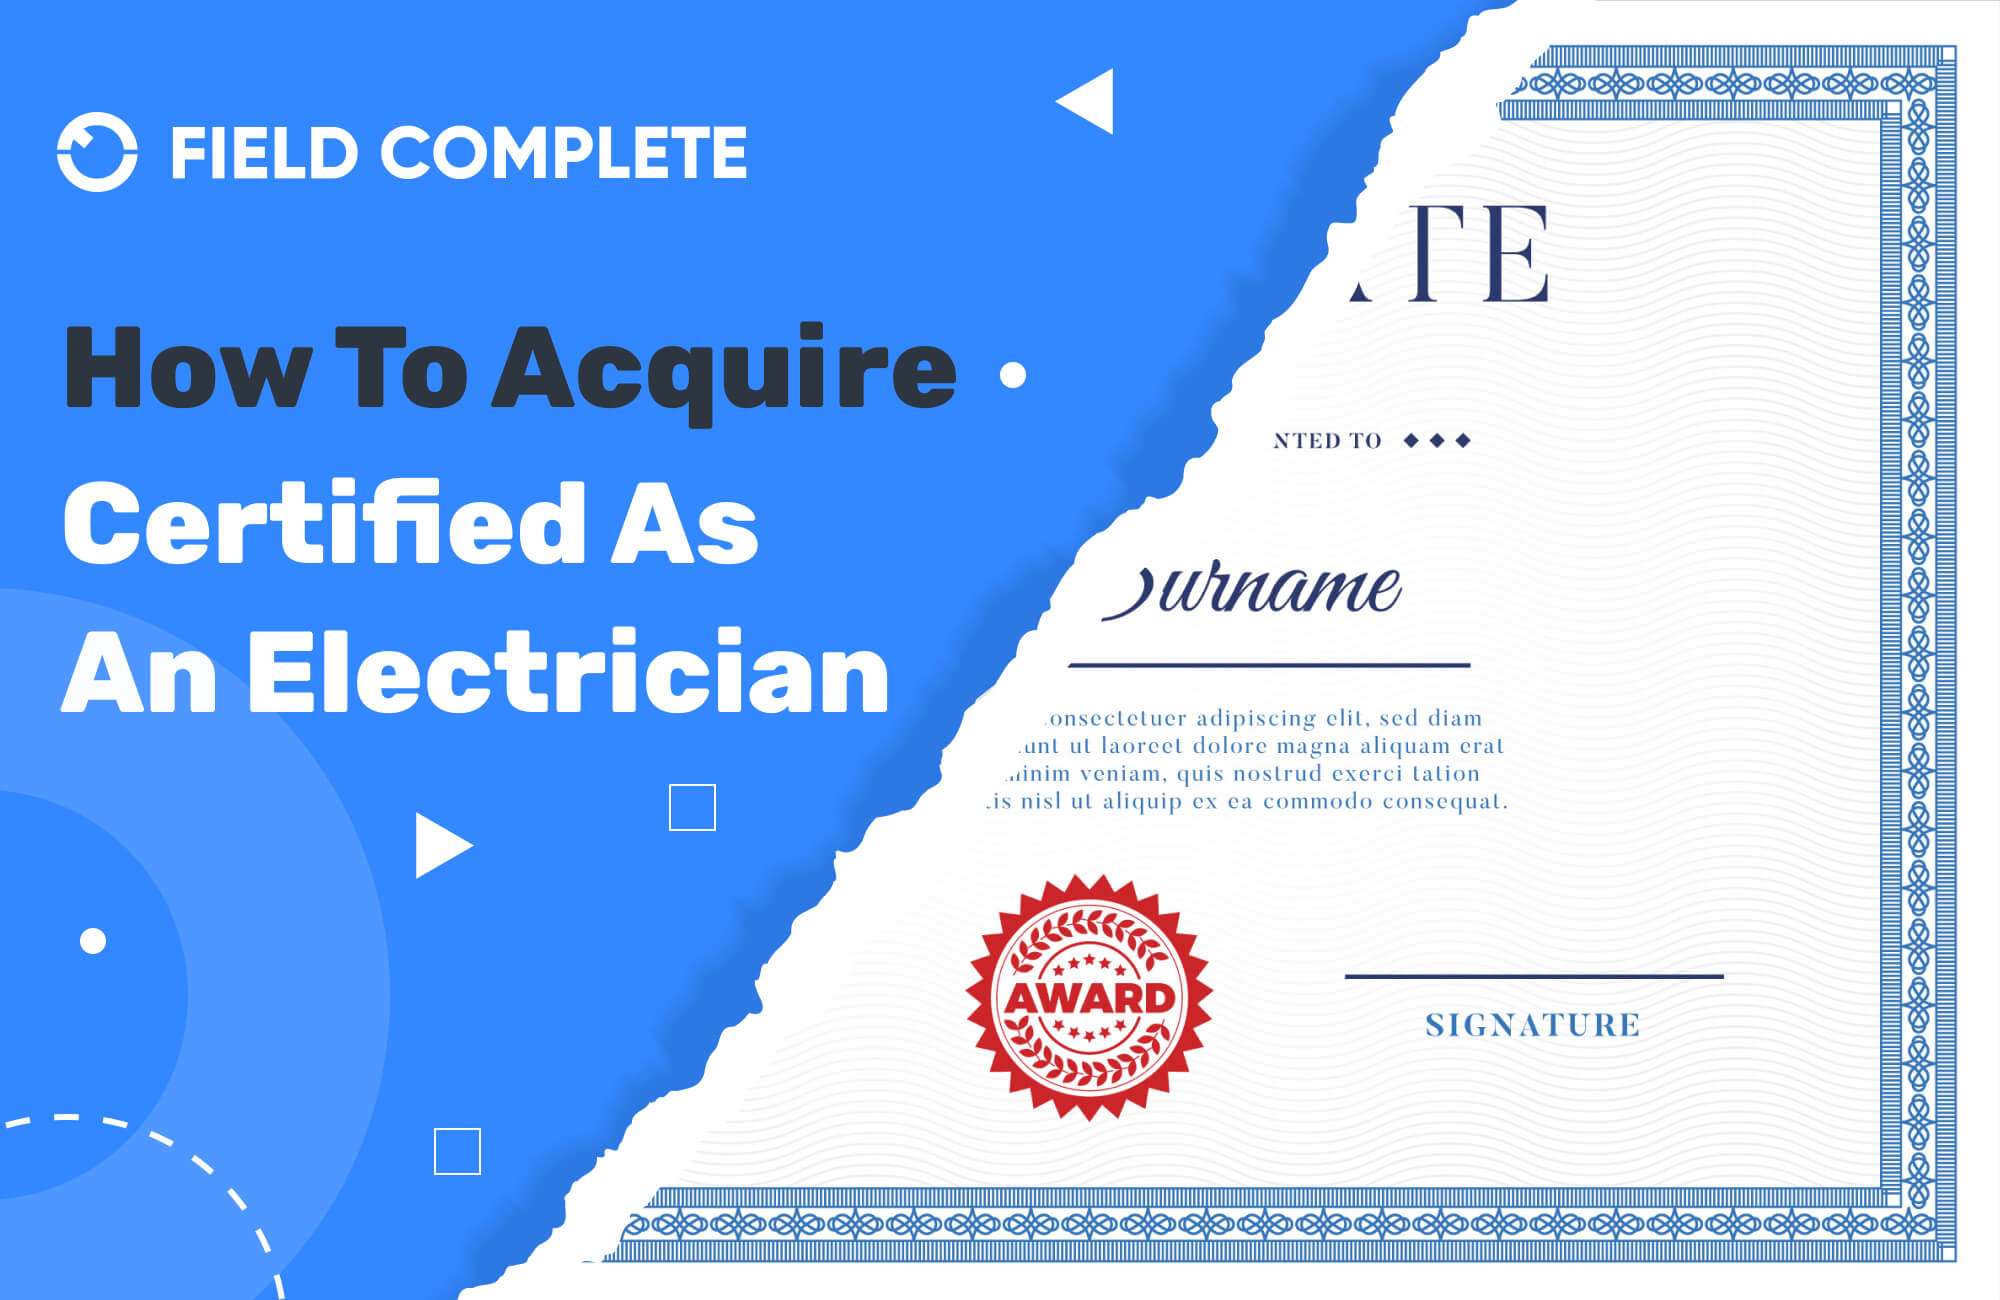 Discover How To Acquire Certified As An Electrician